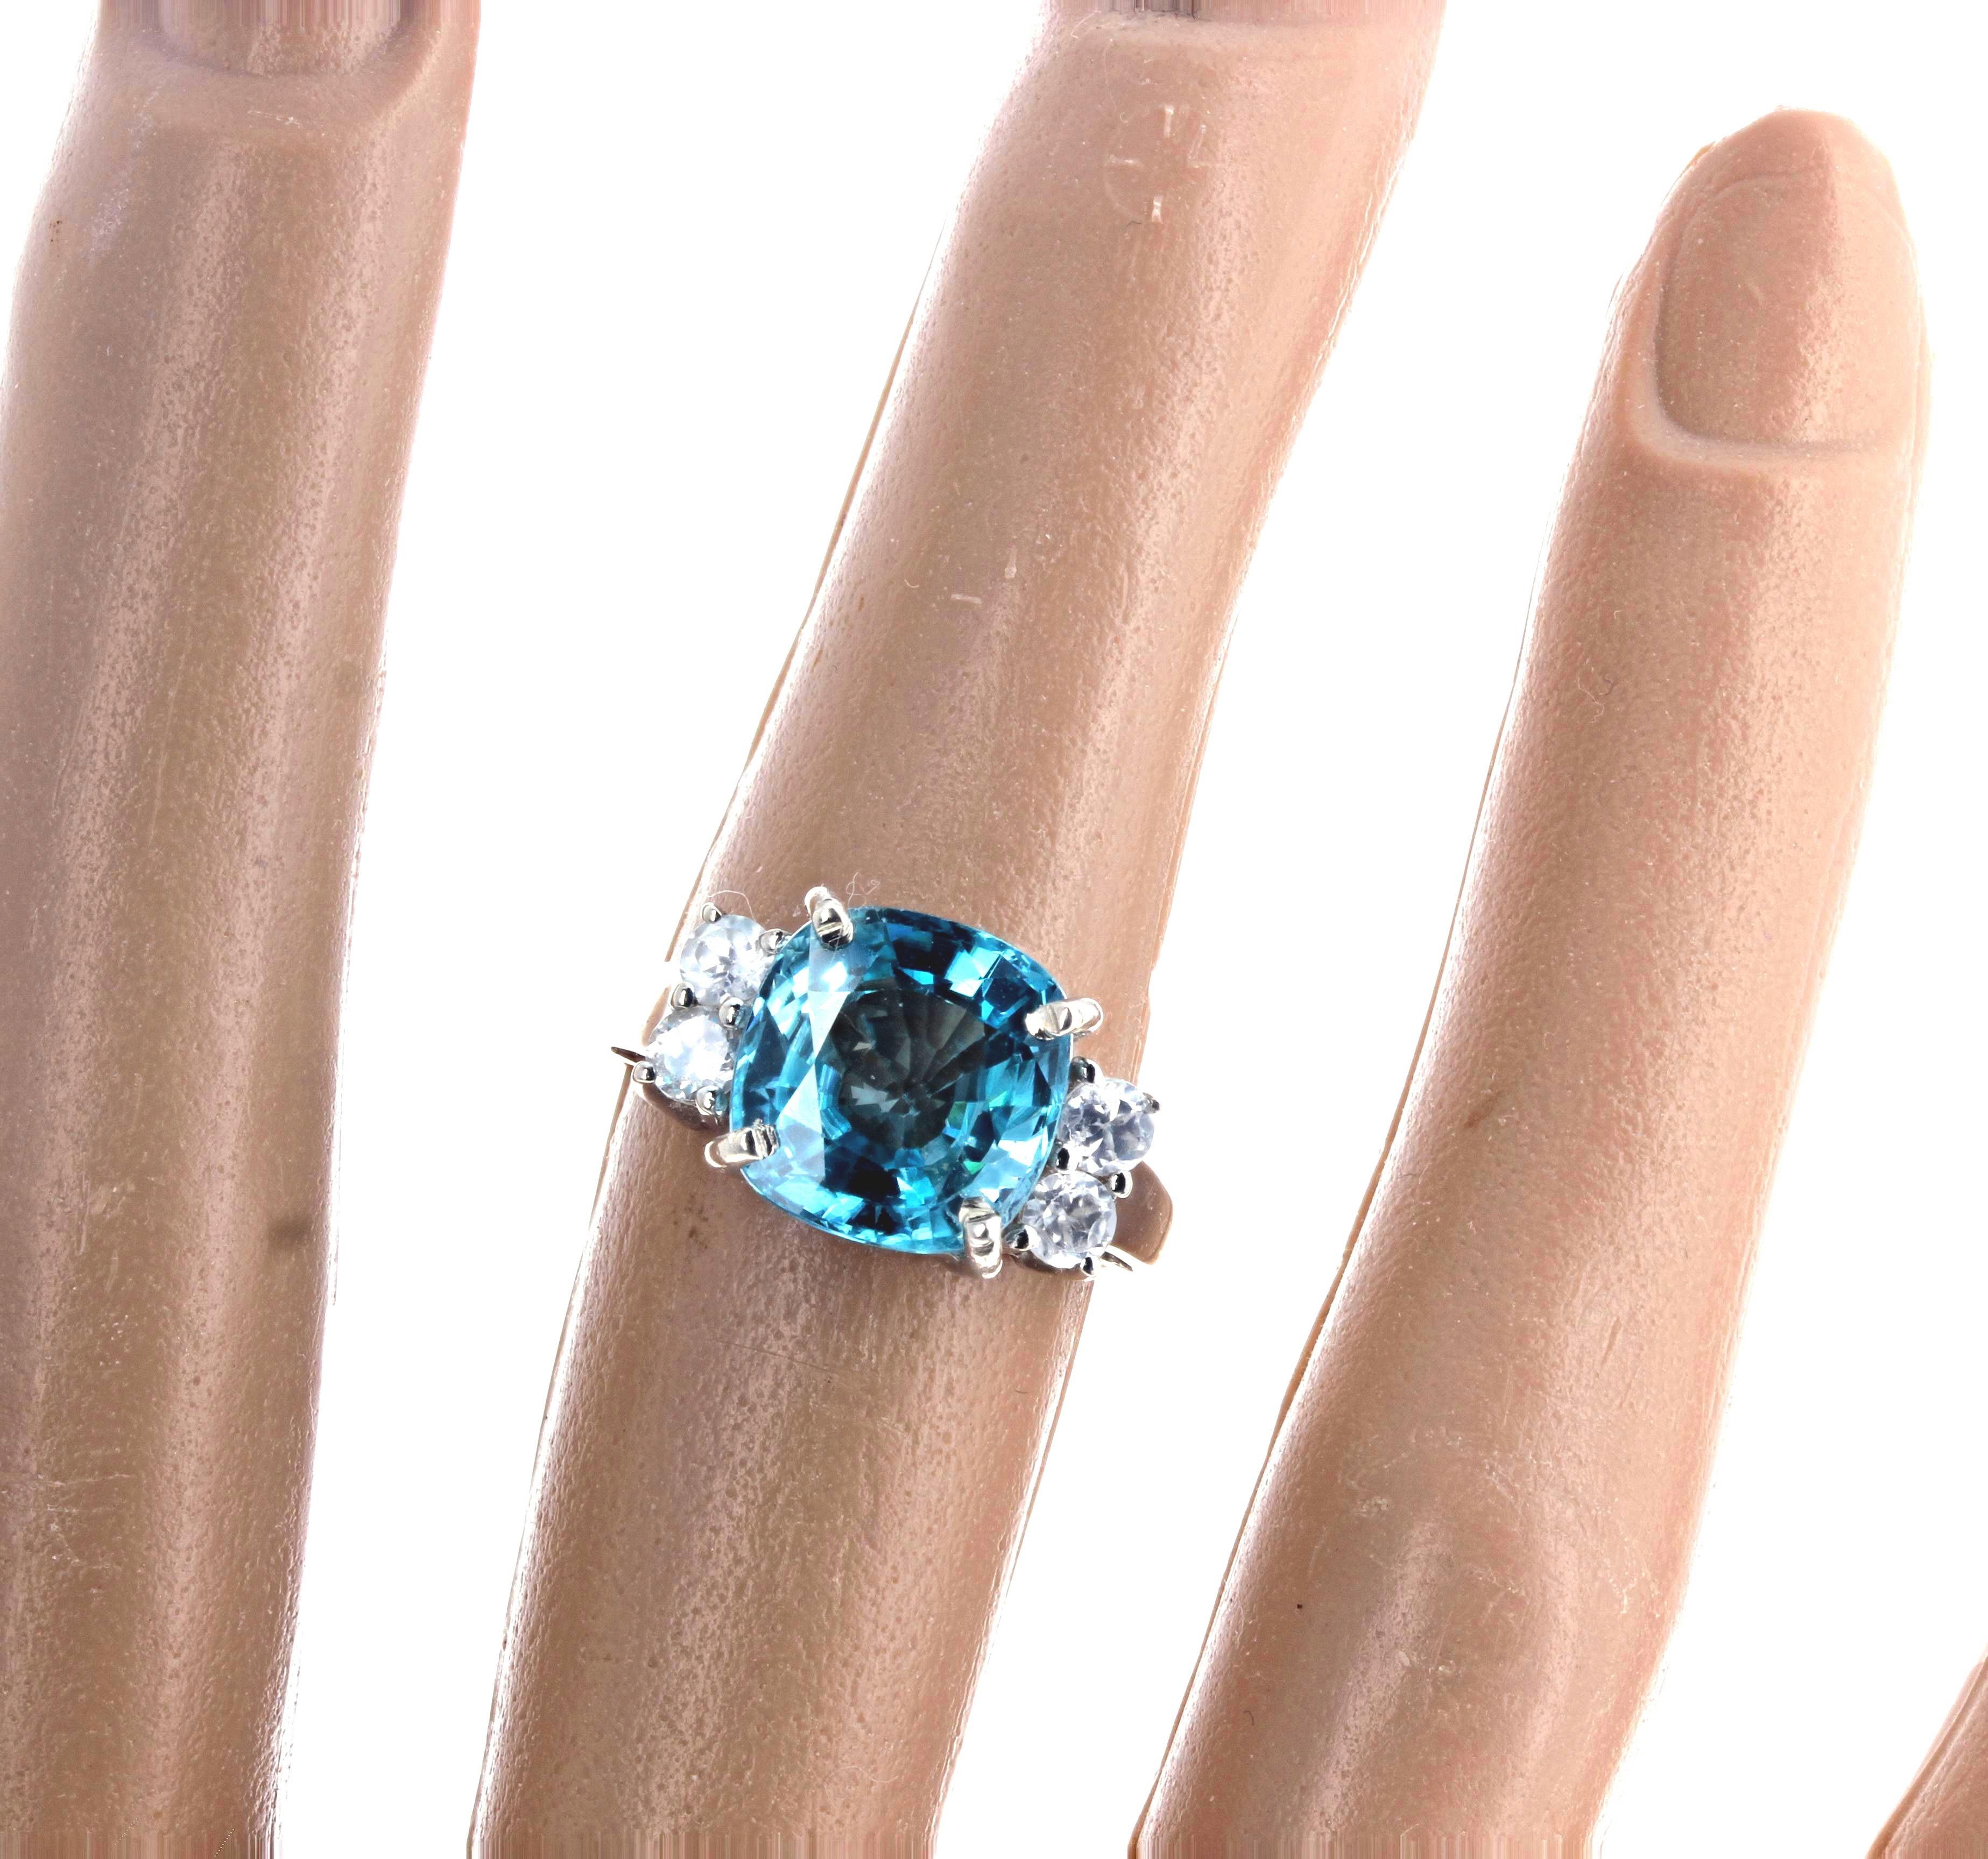 Cushion Cut AJD Intense Blue 6.82Ct. Natural Cambodian Zircon & Real Diamonds Cocktail Ring